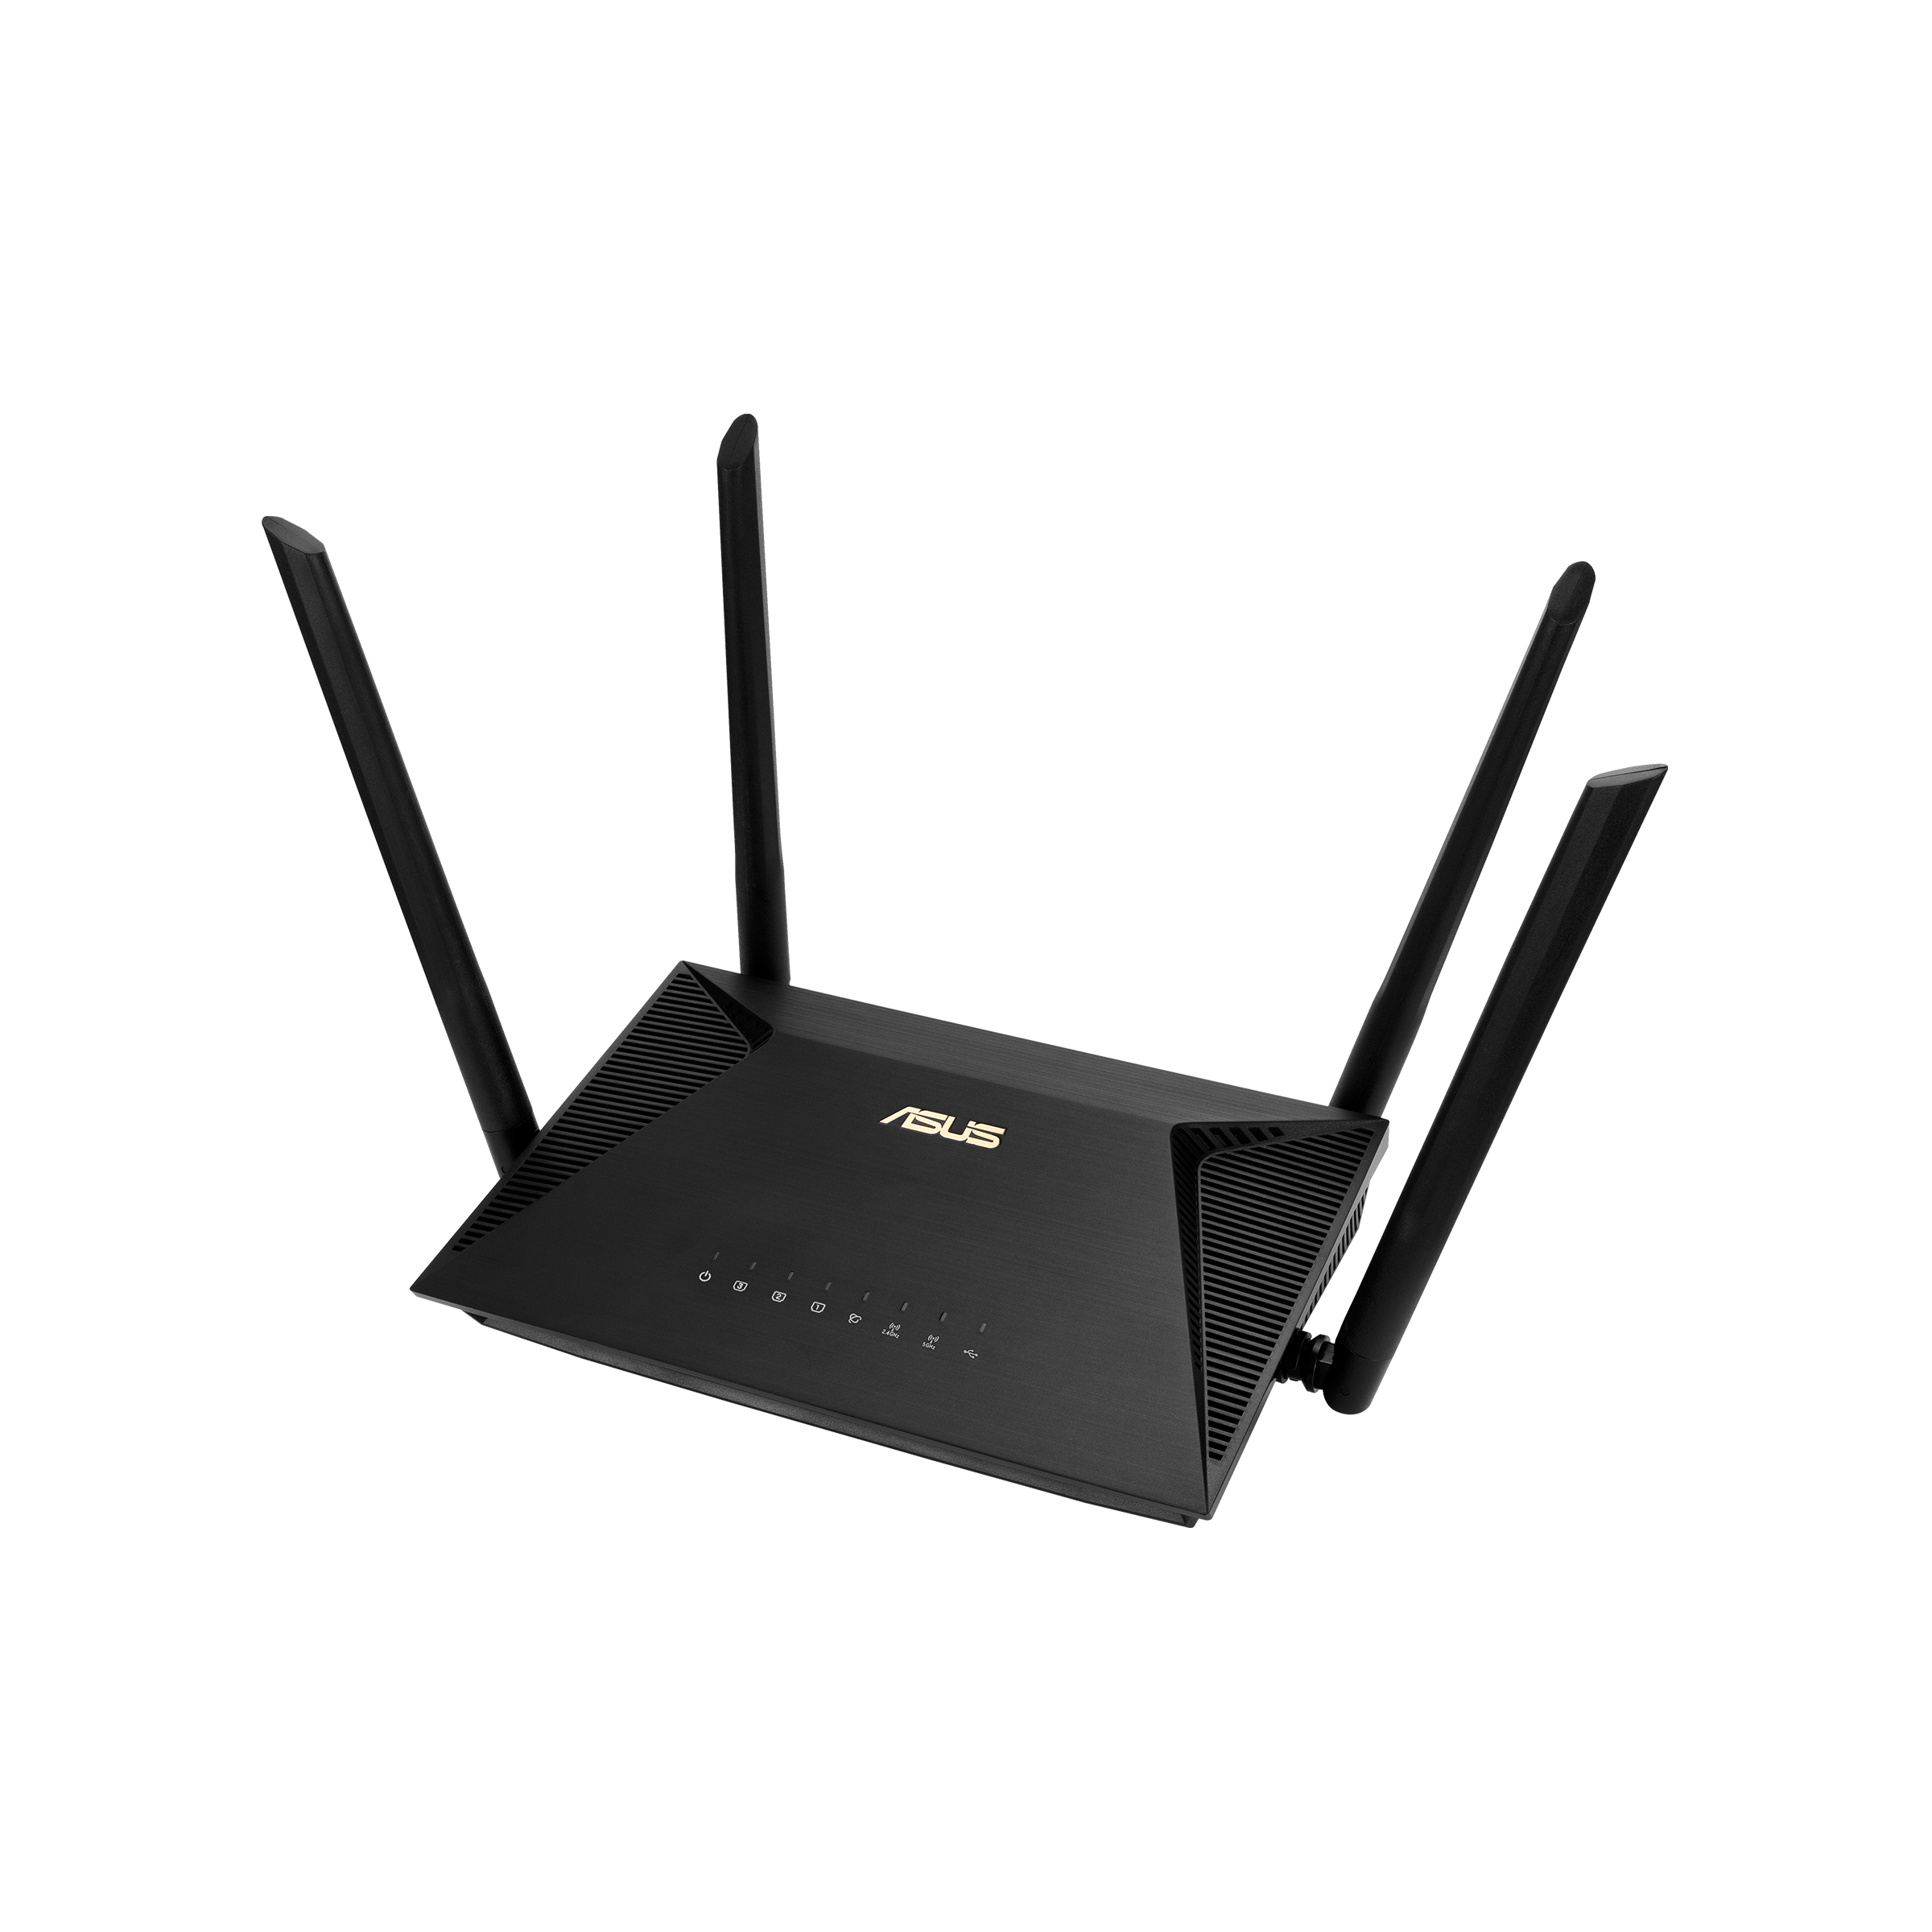 Routeur ASUS Gaming｜Routeurs Wi-Fi｜ASUS France